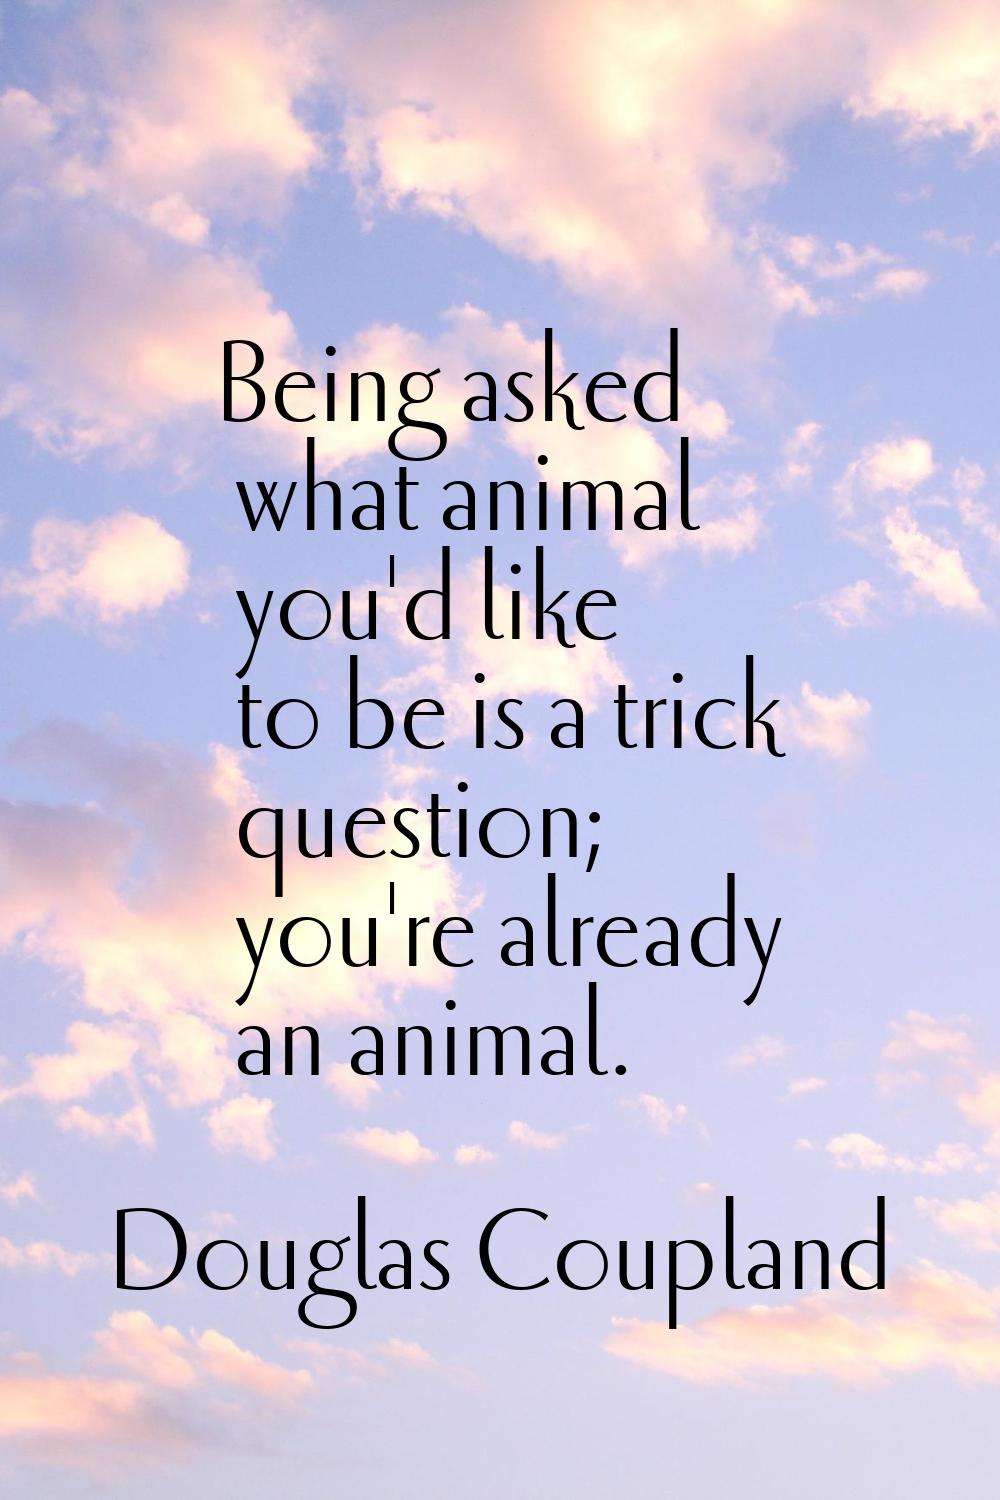 Being asked what animal you'd like to be is a trick question; you're already an animal.